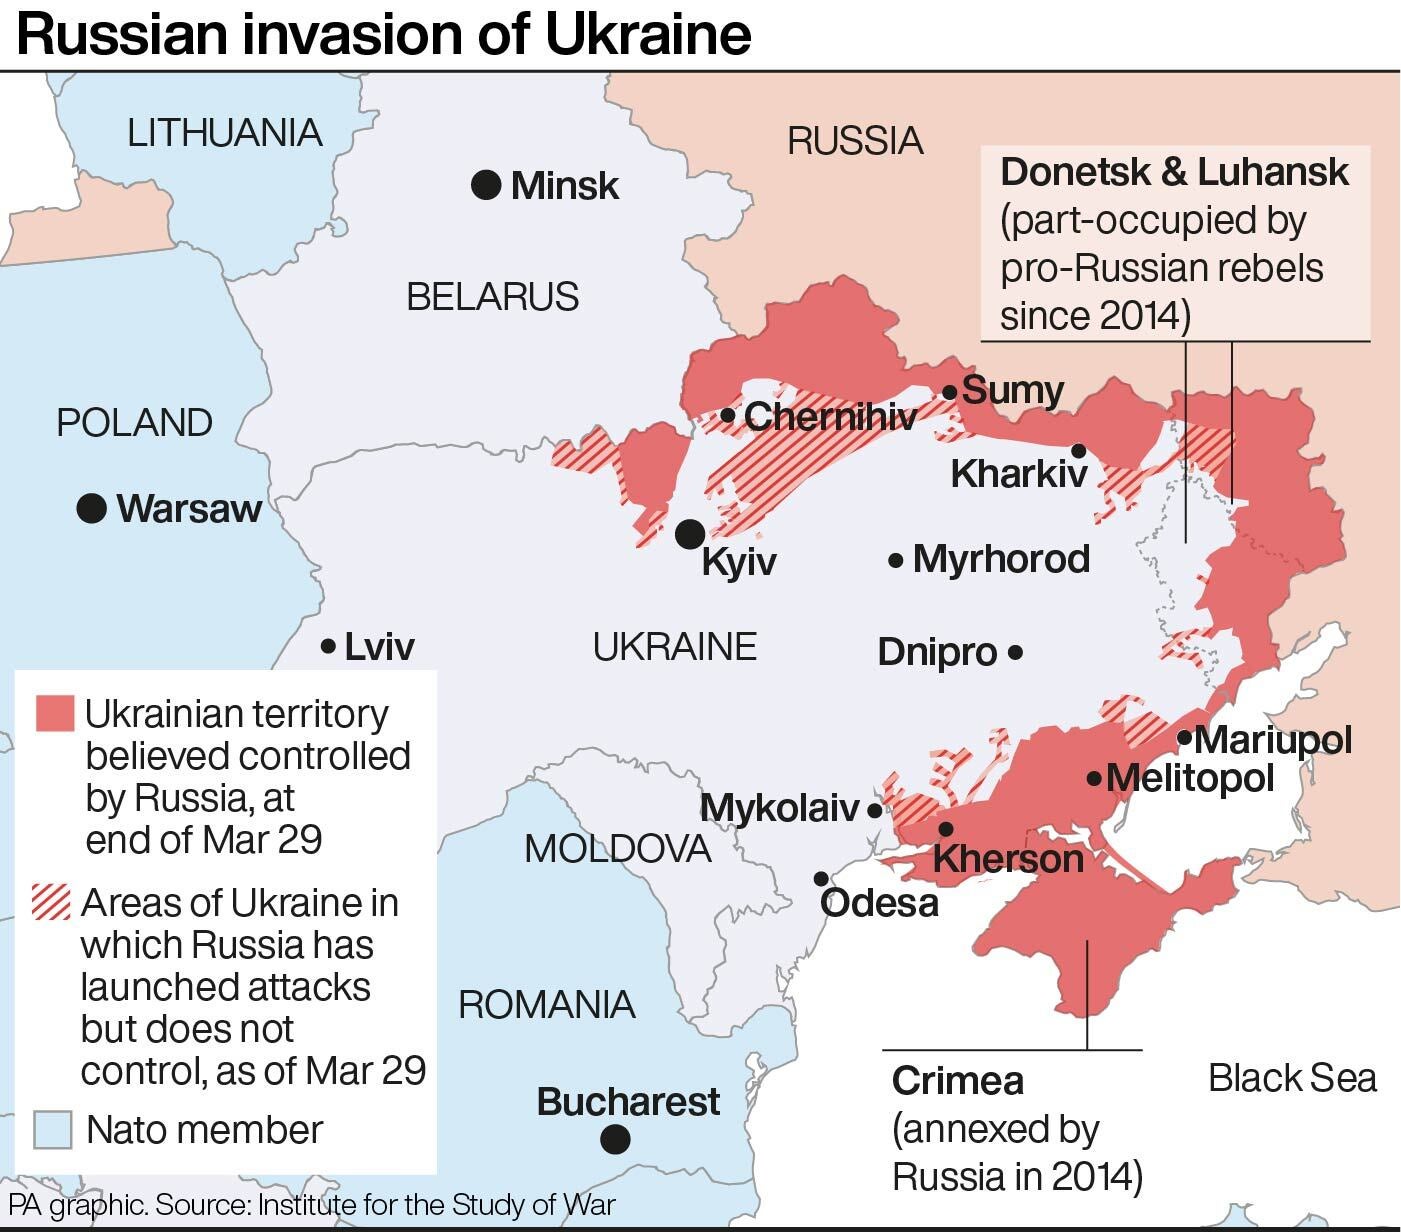 This map shows the extent of Russian invasion of Ukraine